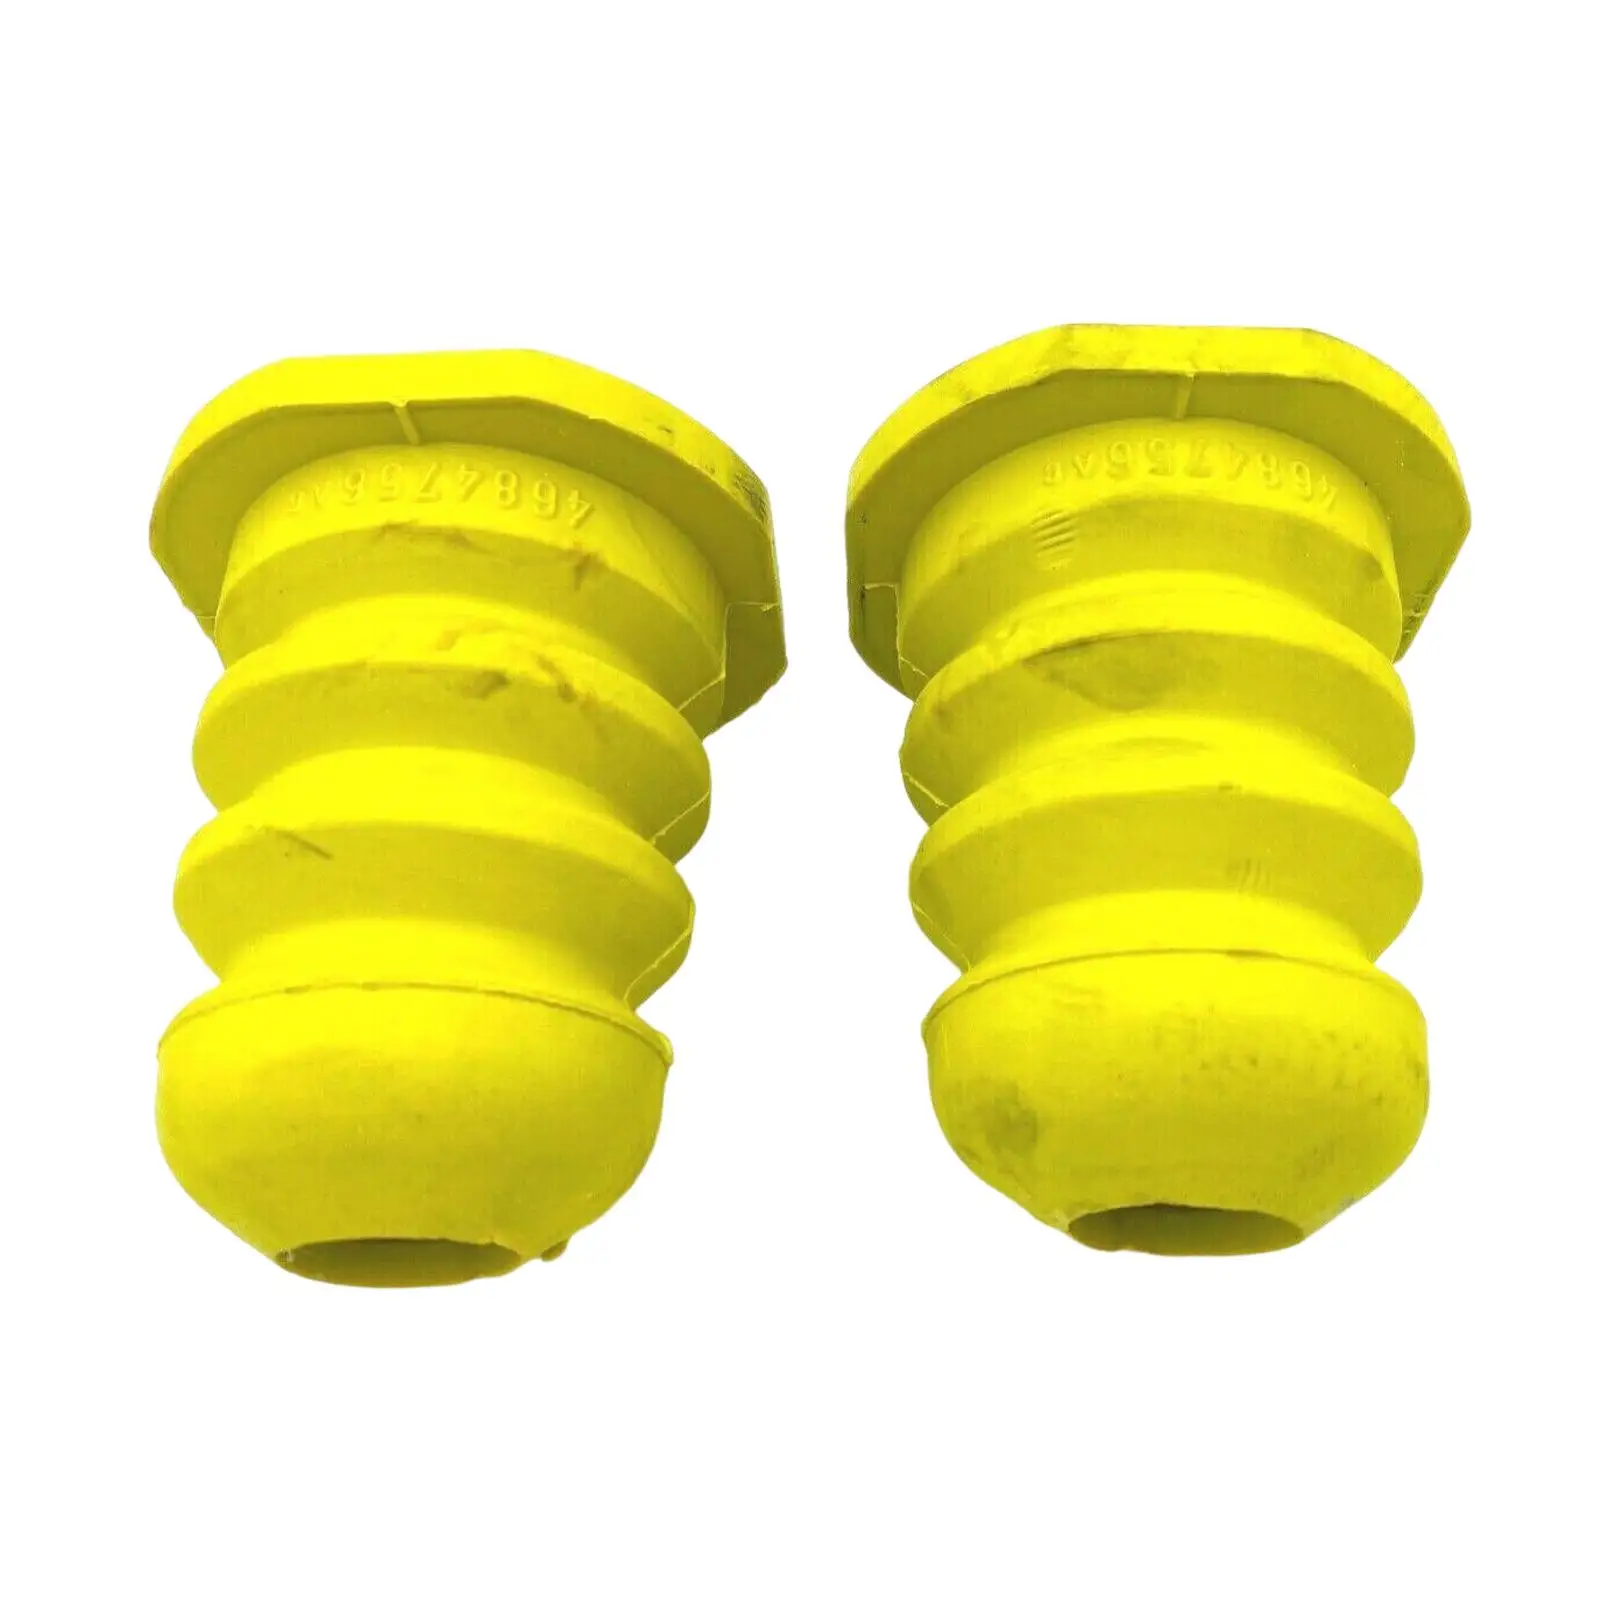 2Pcs Rear Suspension Bump Stop High Quality 4684756Ab Rubber Buffer High Performance Replace Accessory